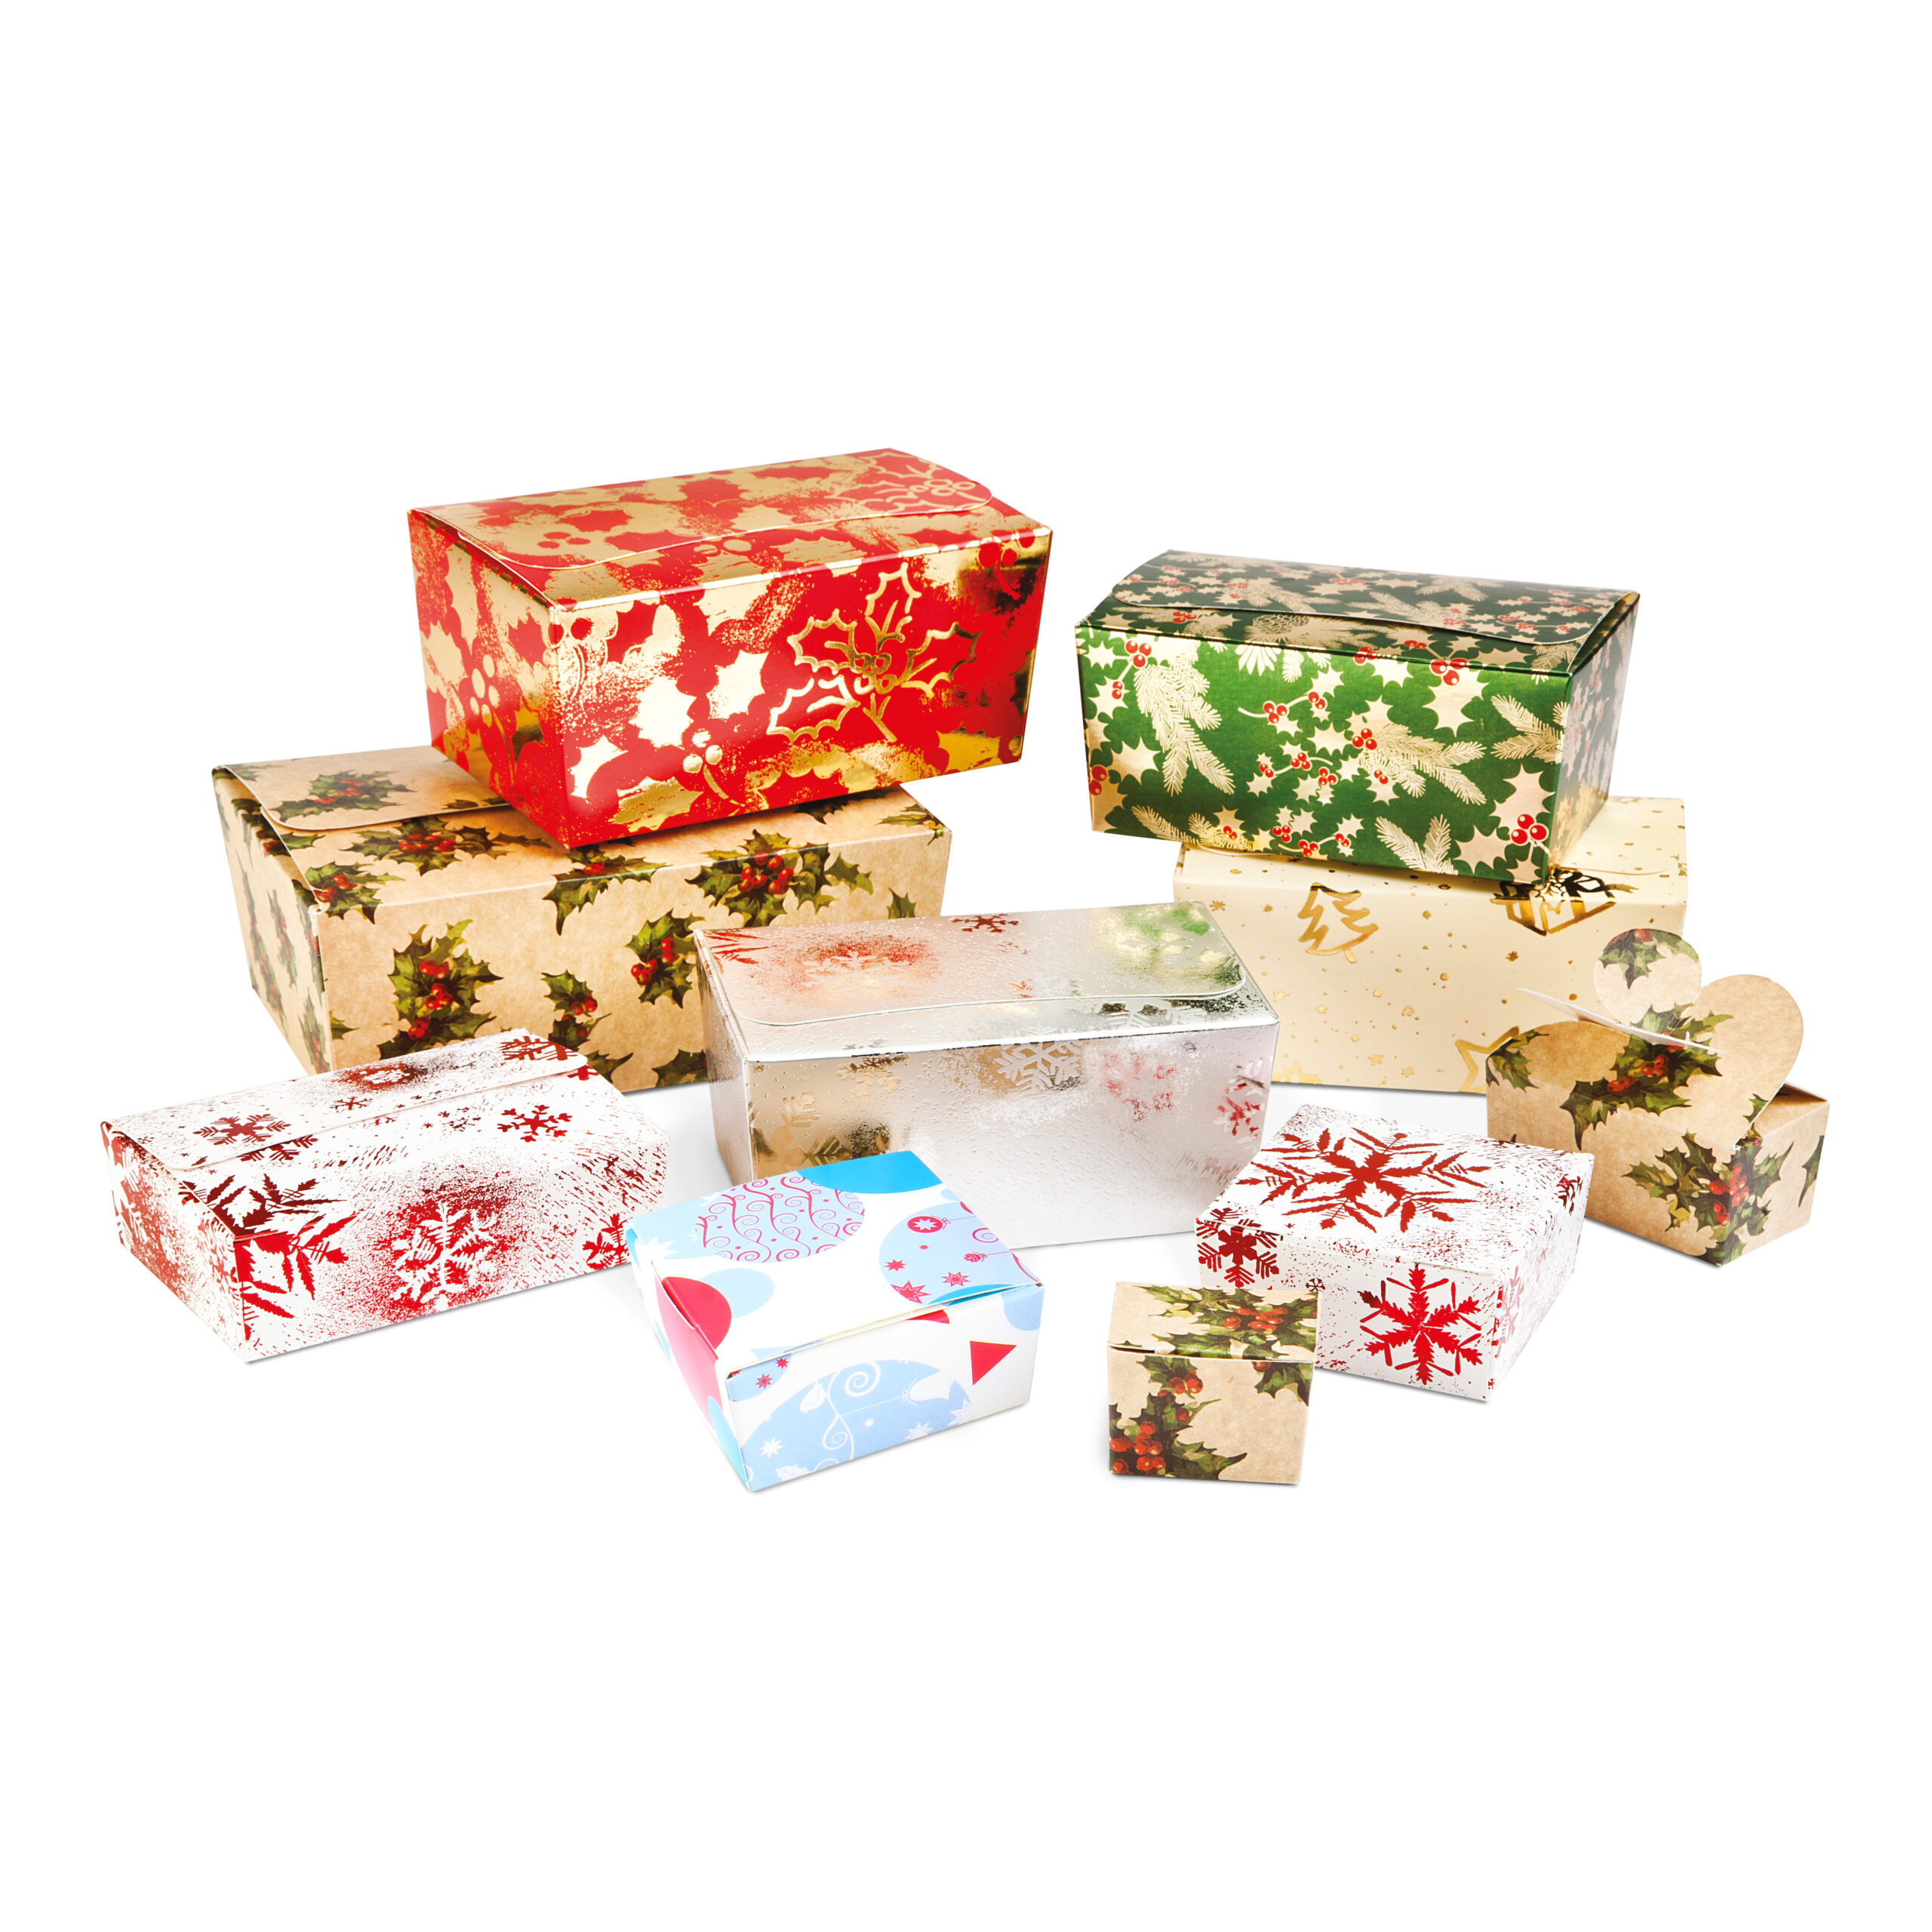 A variety of bright and festive christmas themed ballotin boxes. Perfect for filling with artisan chocolates or gourmet truffles. Patterns include holly, snowflakes, baubles and stars